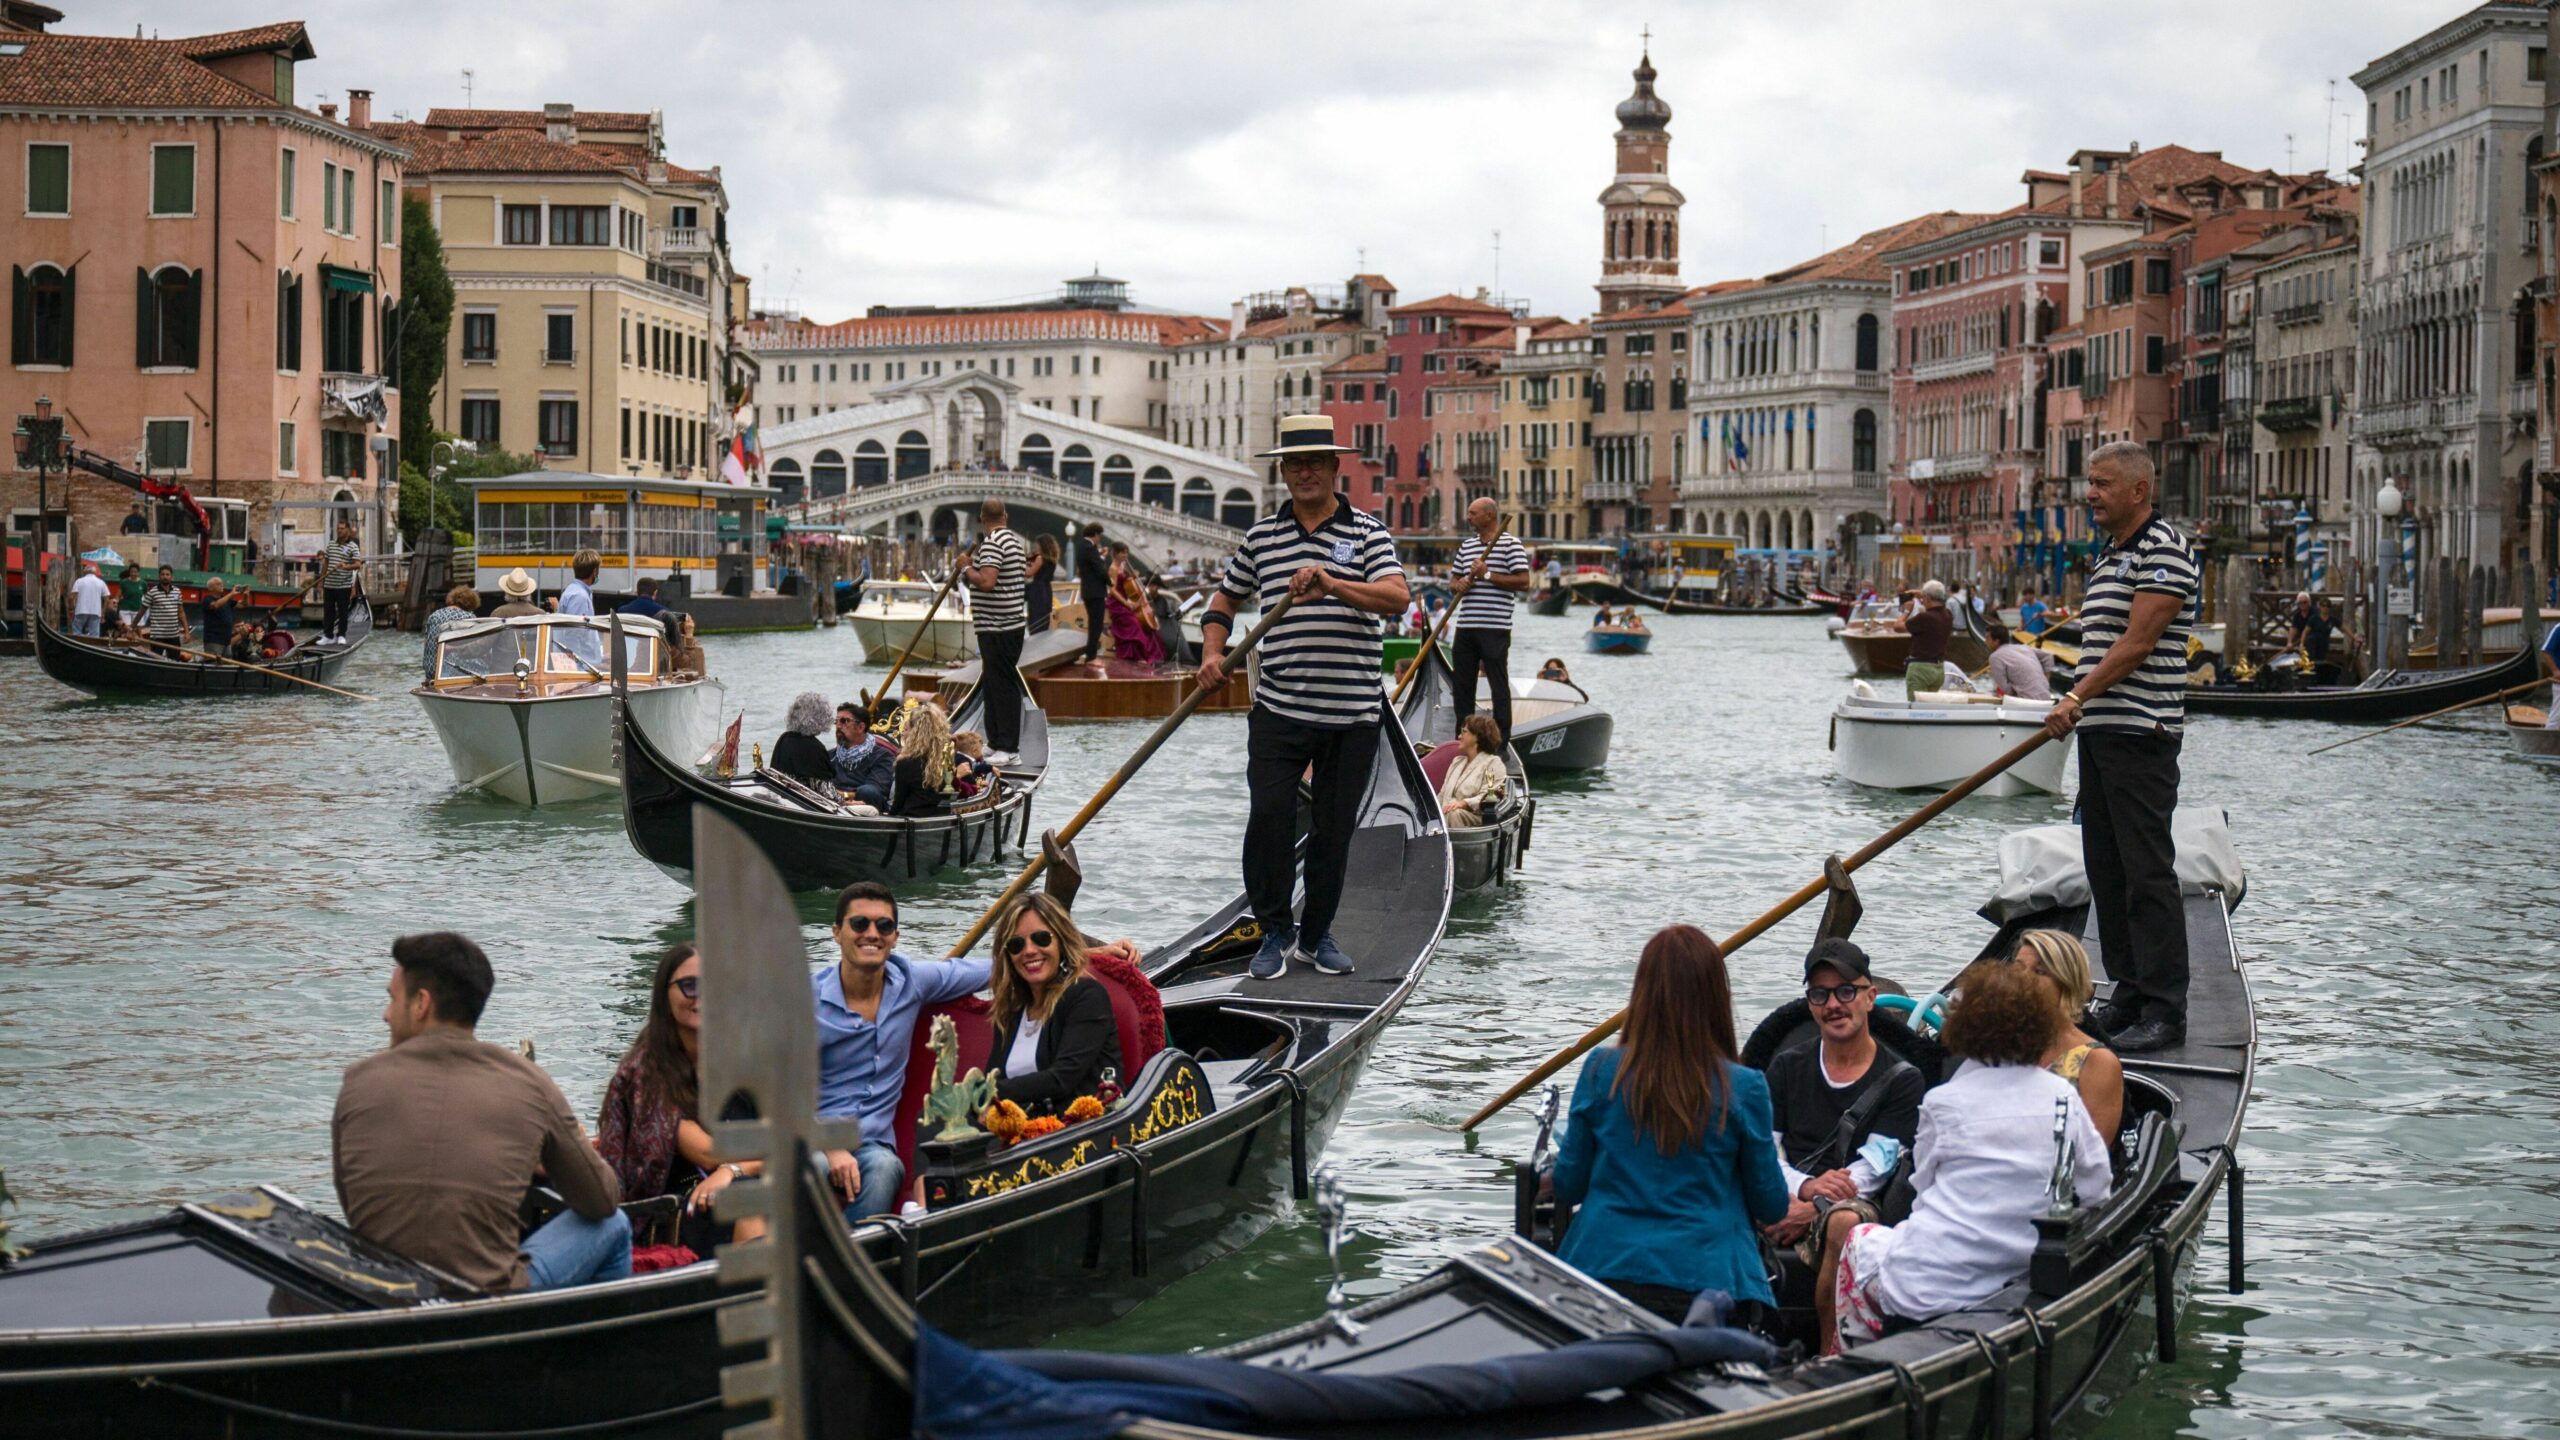 Venice will limit tour groups to 25 people and ban loudspeakers to control tourism